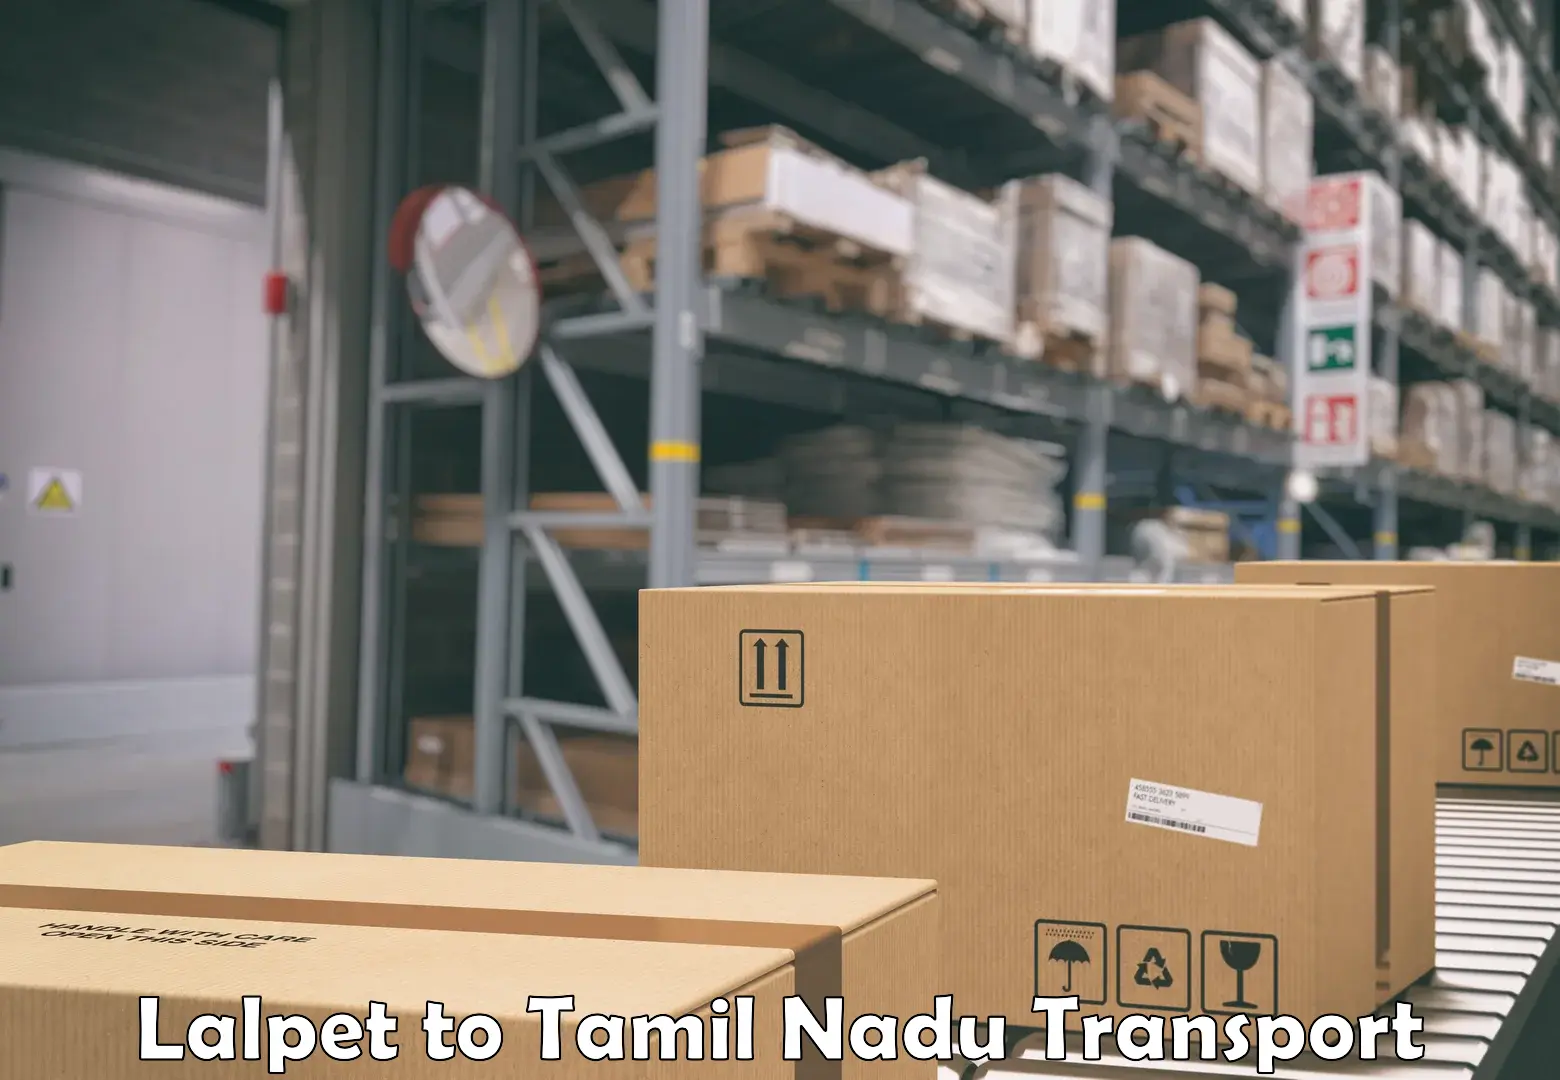 Commercial transport service Lalpet to Coimbatore